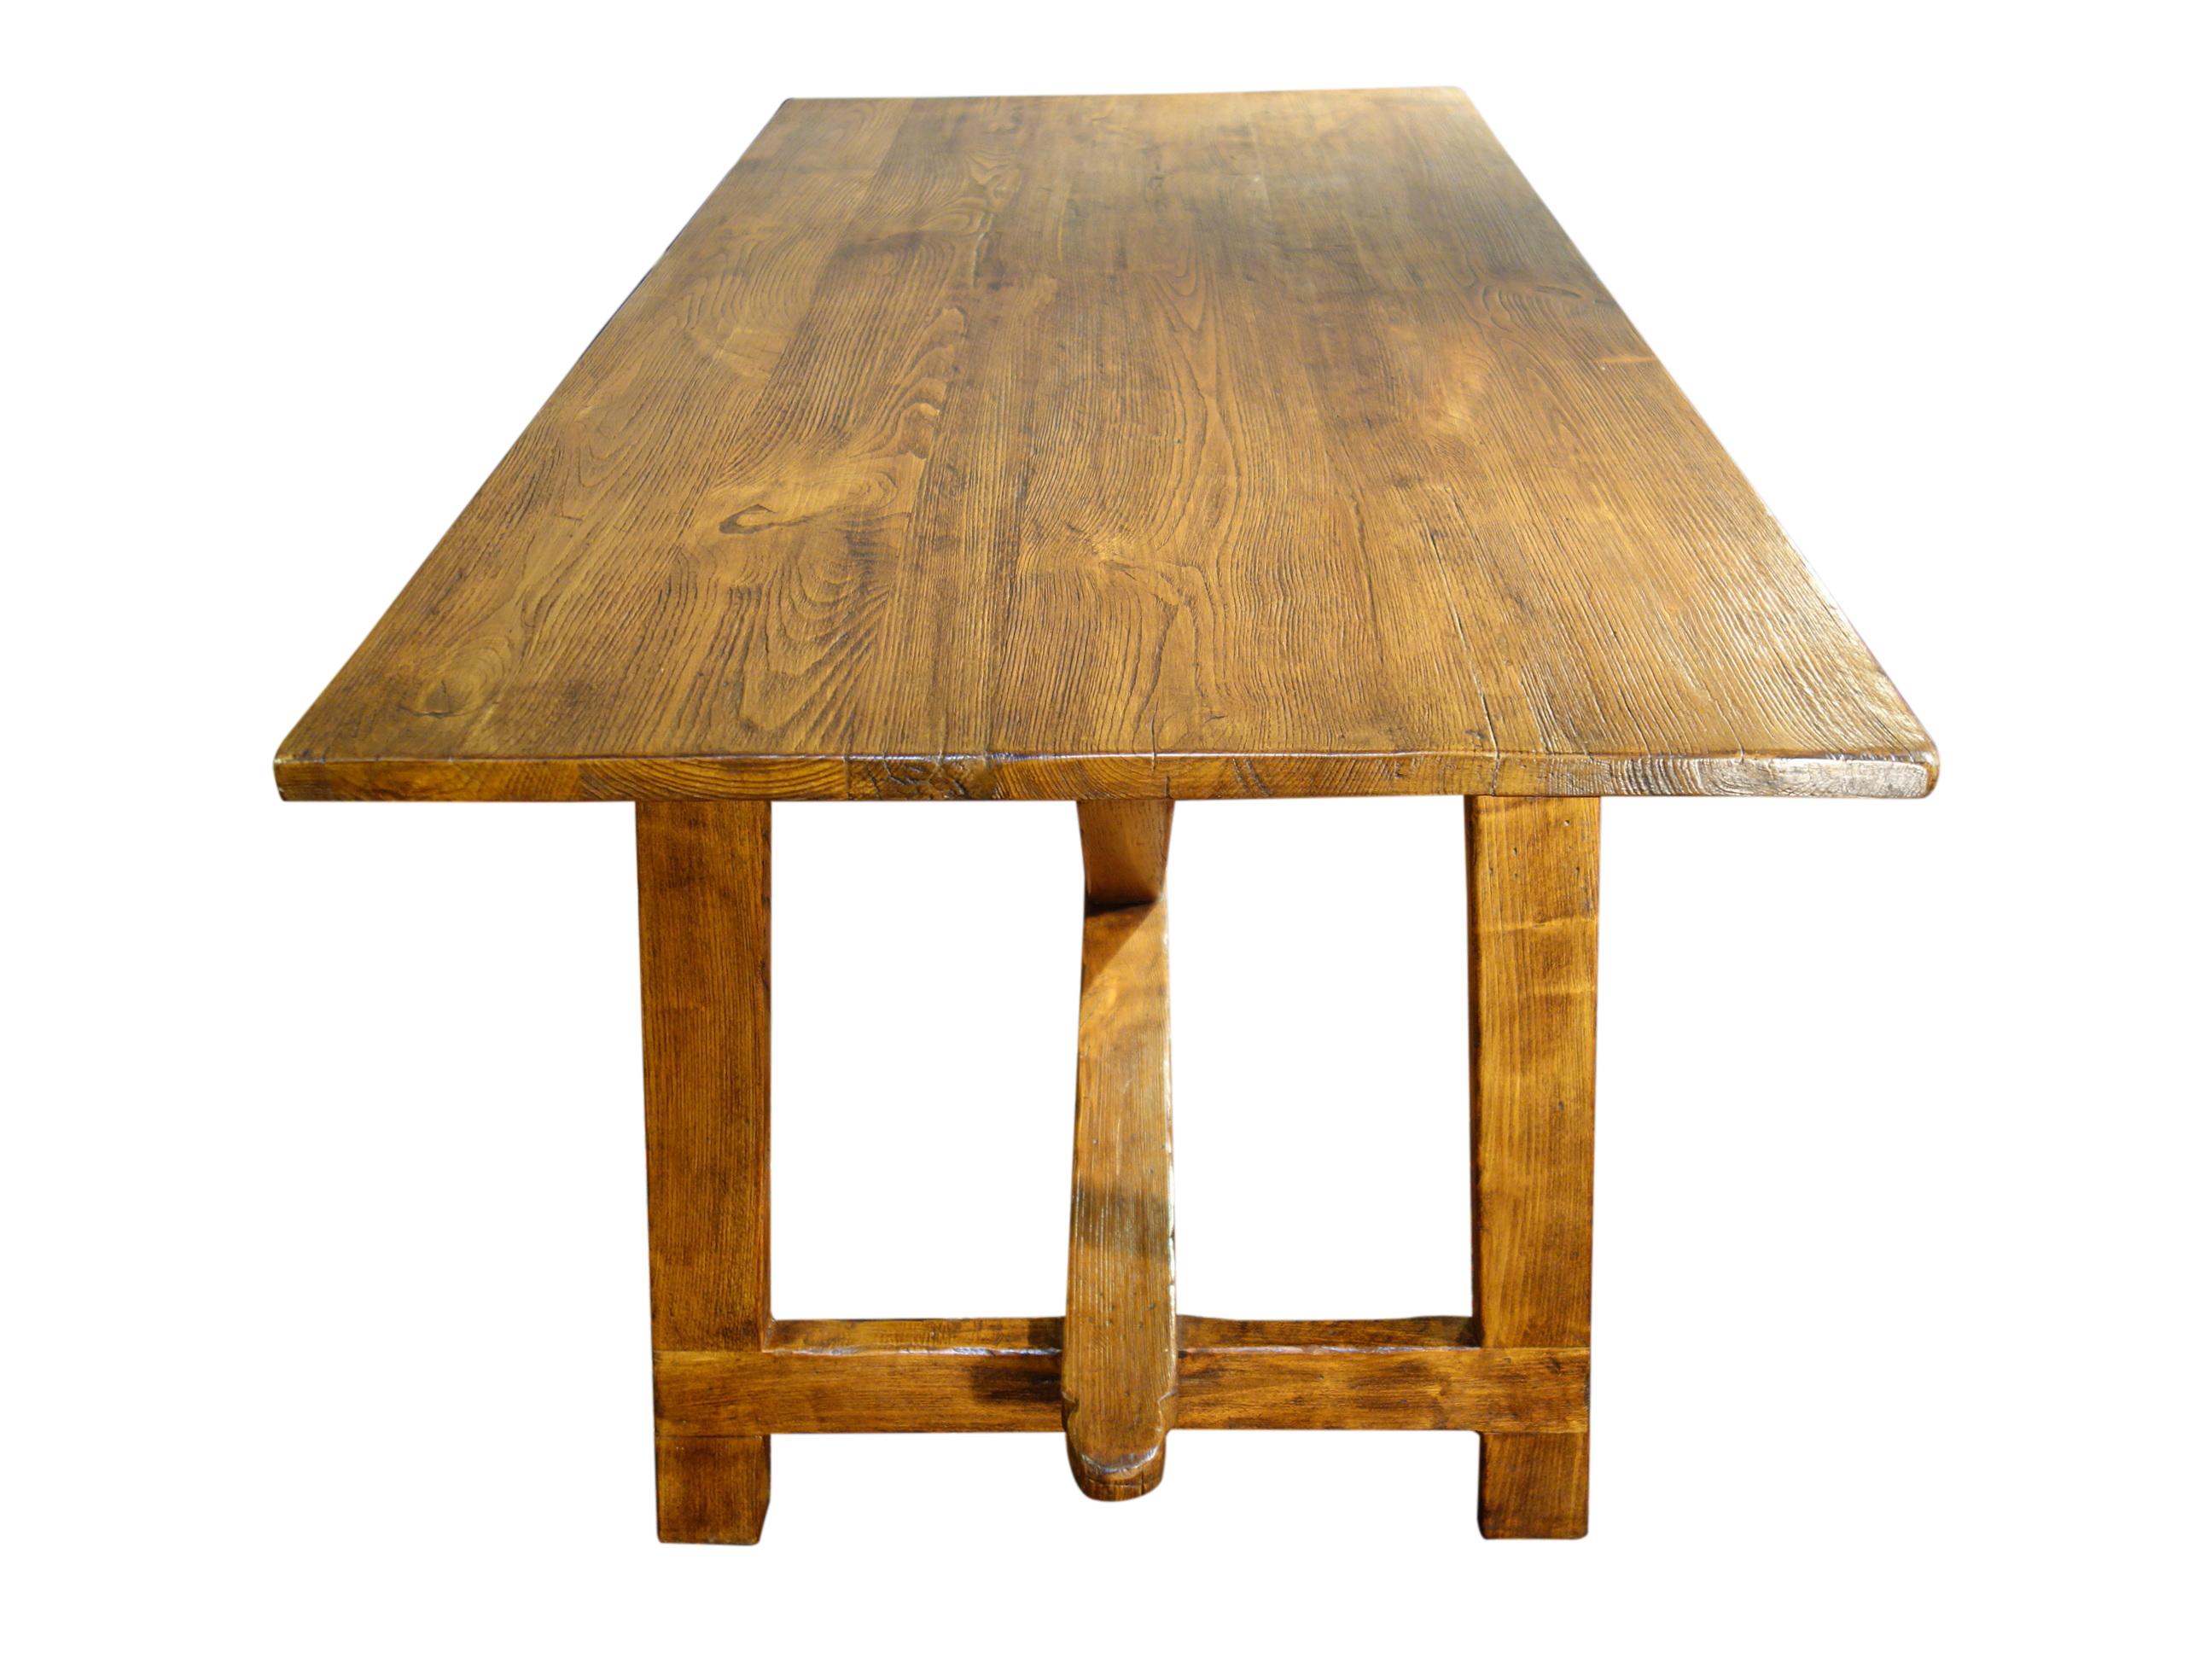 17th C Italian Refectory Style Solid Chestnut CAPRETTA Table with dining options For Sale 1